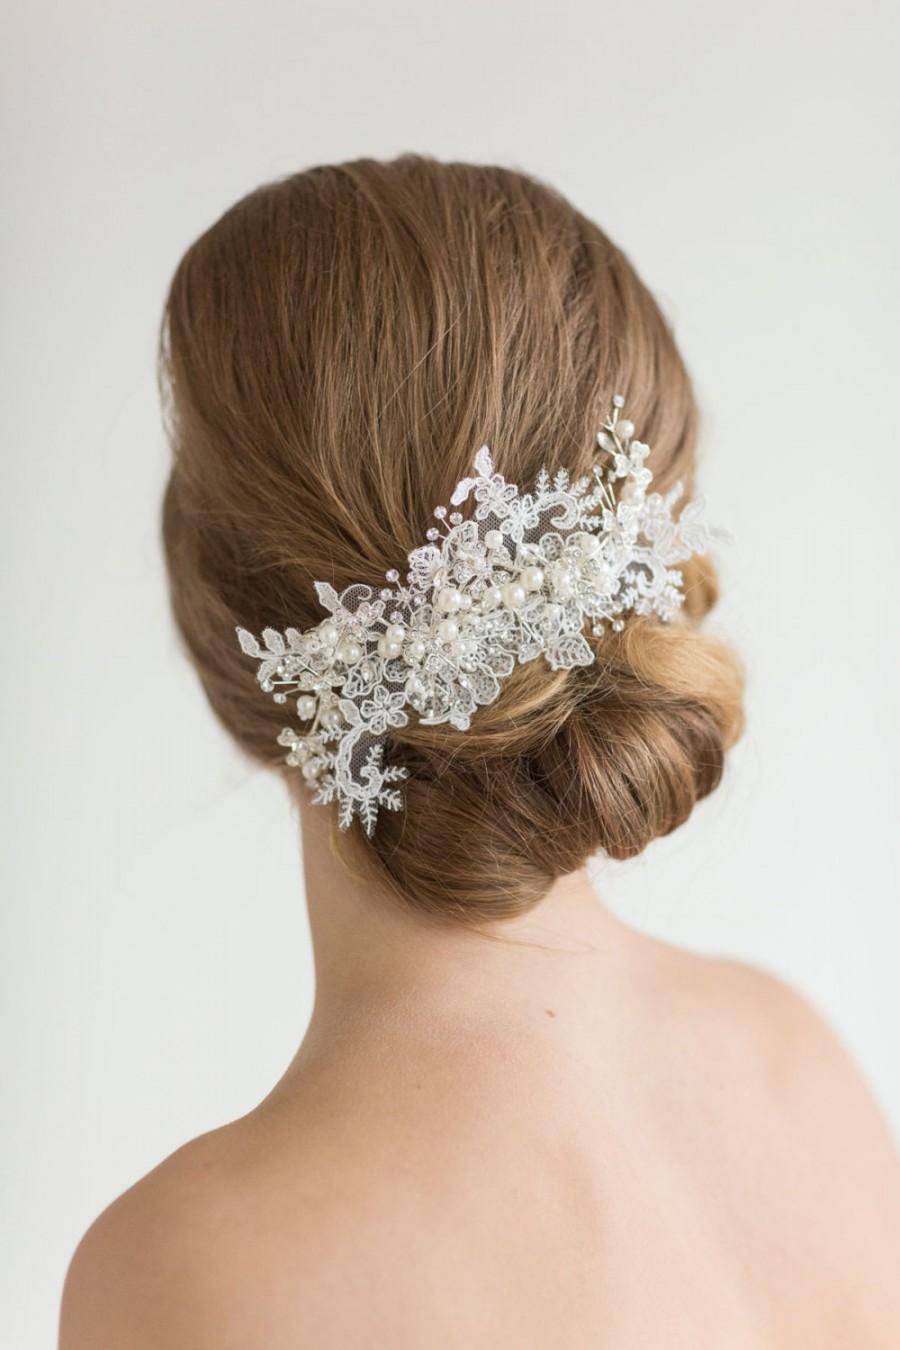 Mariage - Lace Headpiece,  Crystal Pearl and lace Hair Comb, Wedding Hair Accessory